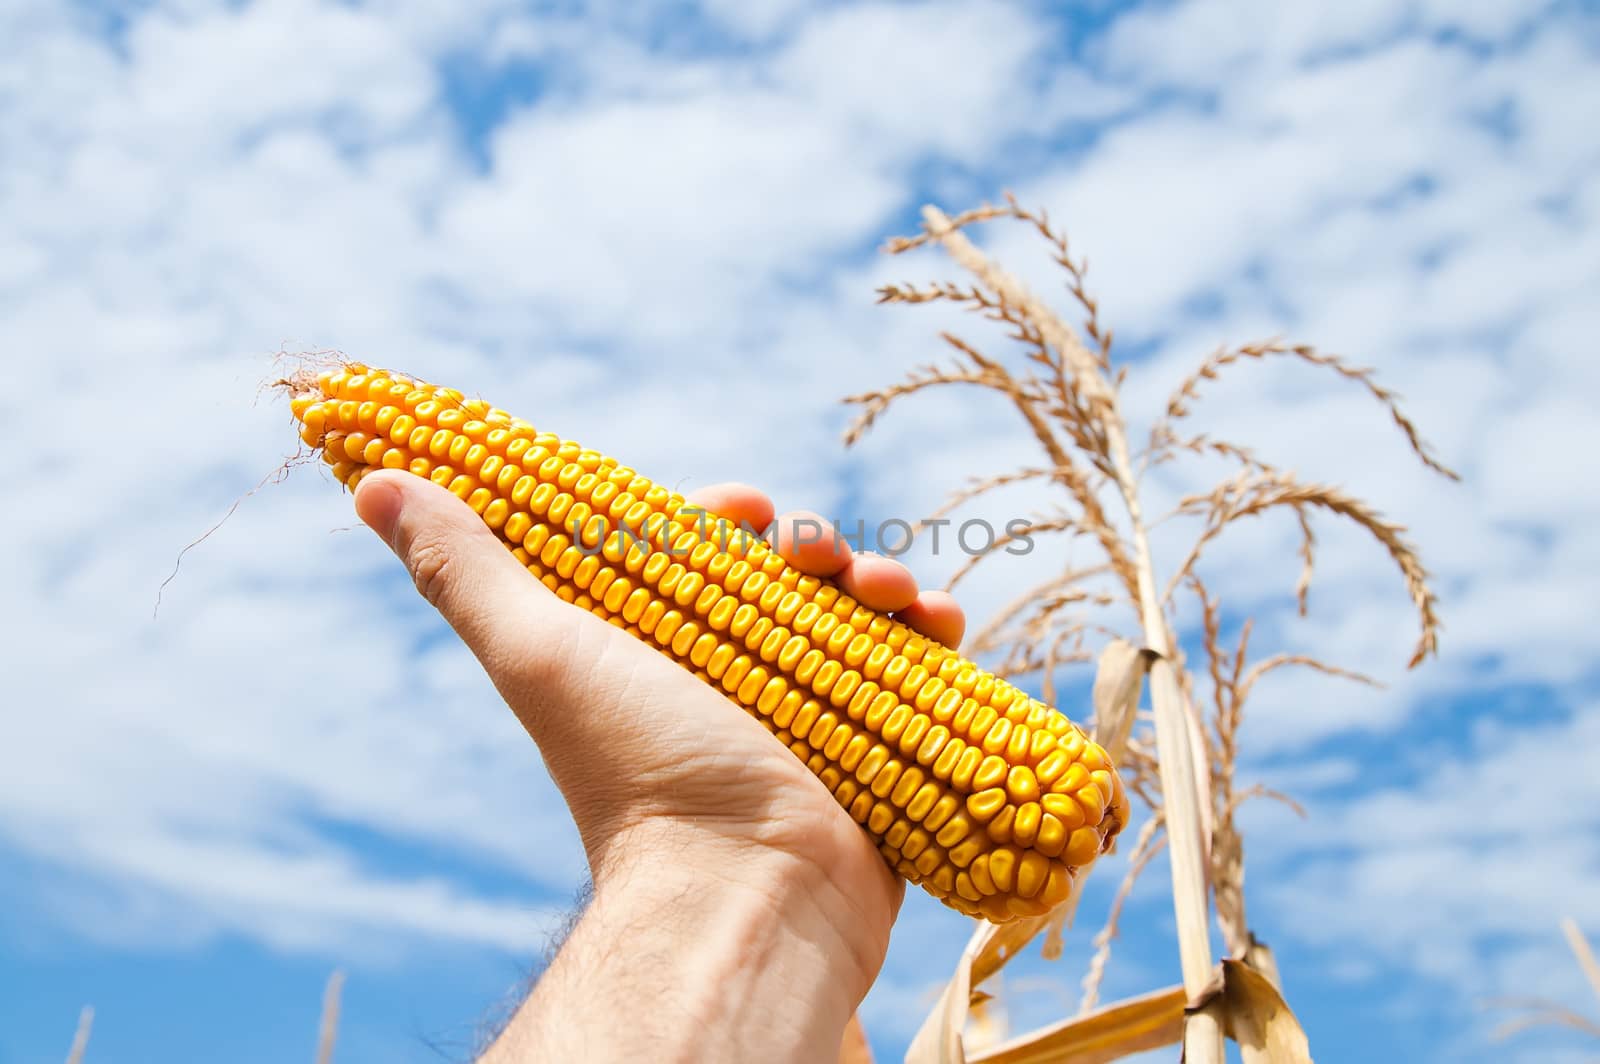 maize in hand